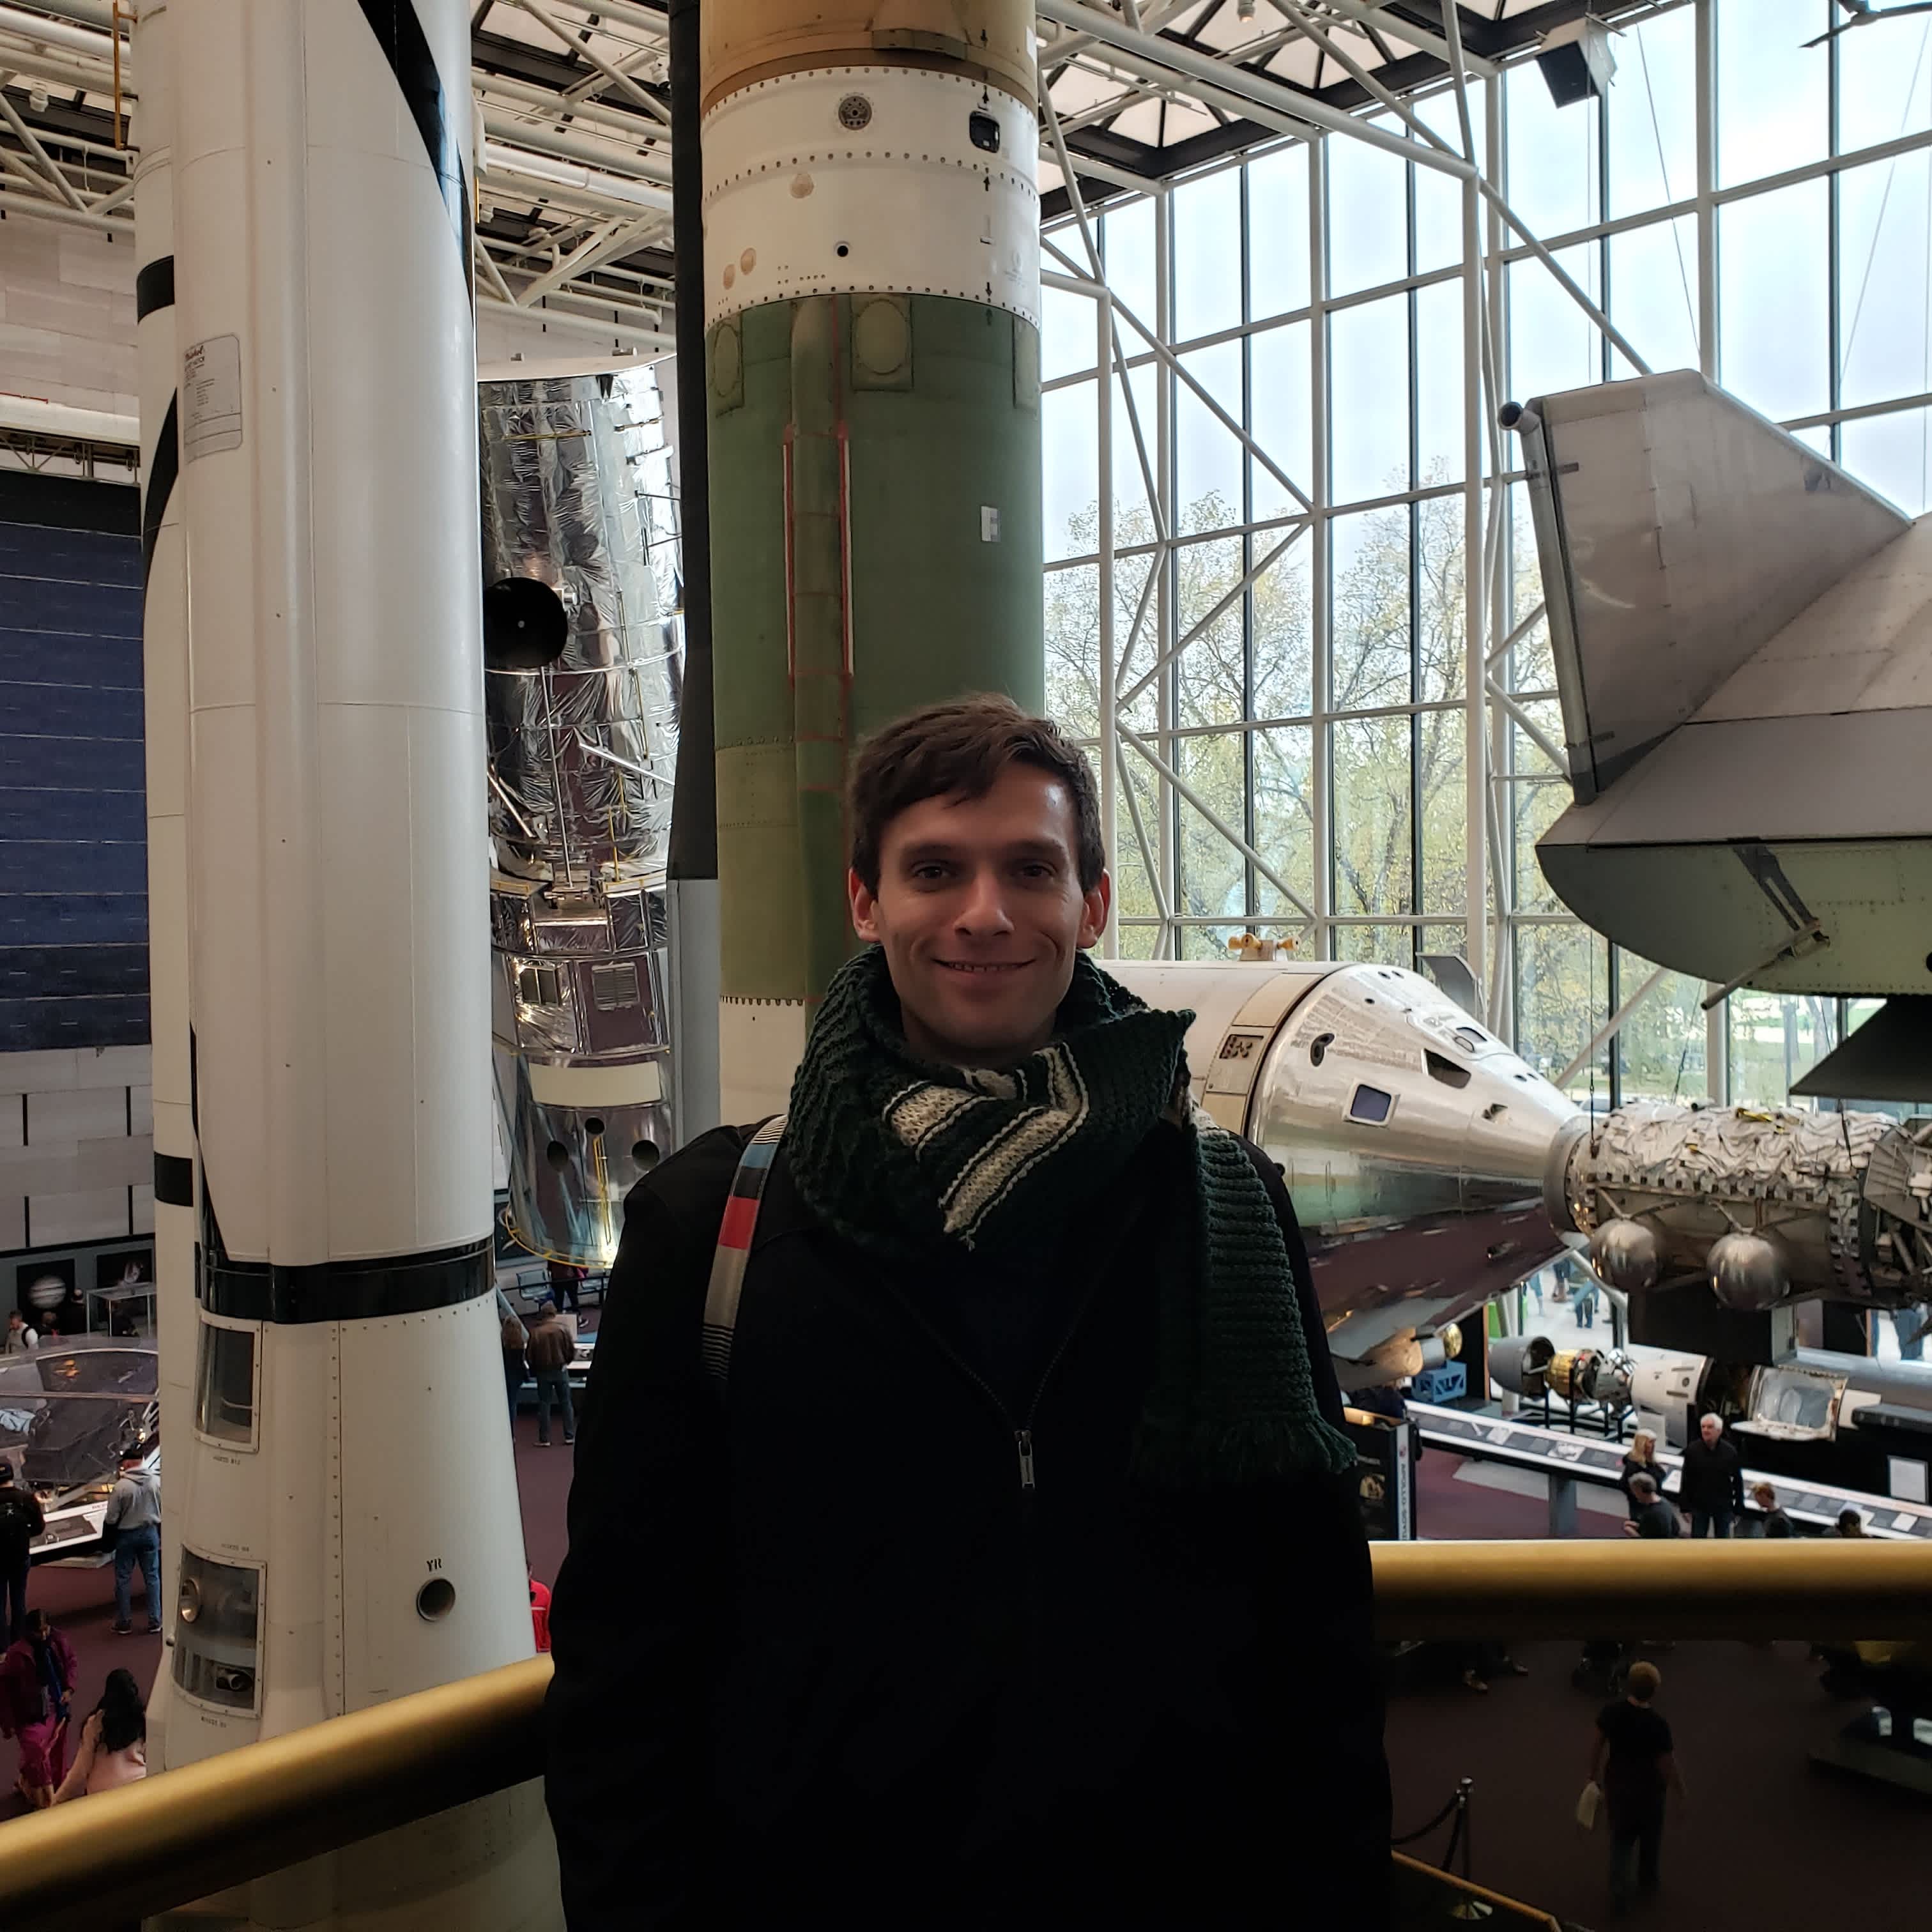 Nathaniel J. Liberty in the Rocket Garden of the National Air and Space Museum, Washington DC.